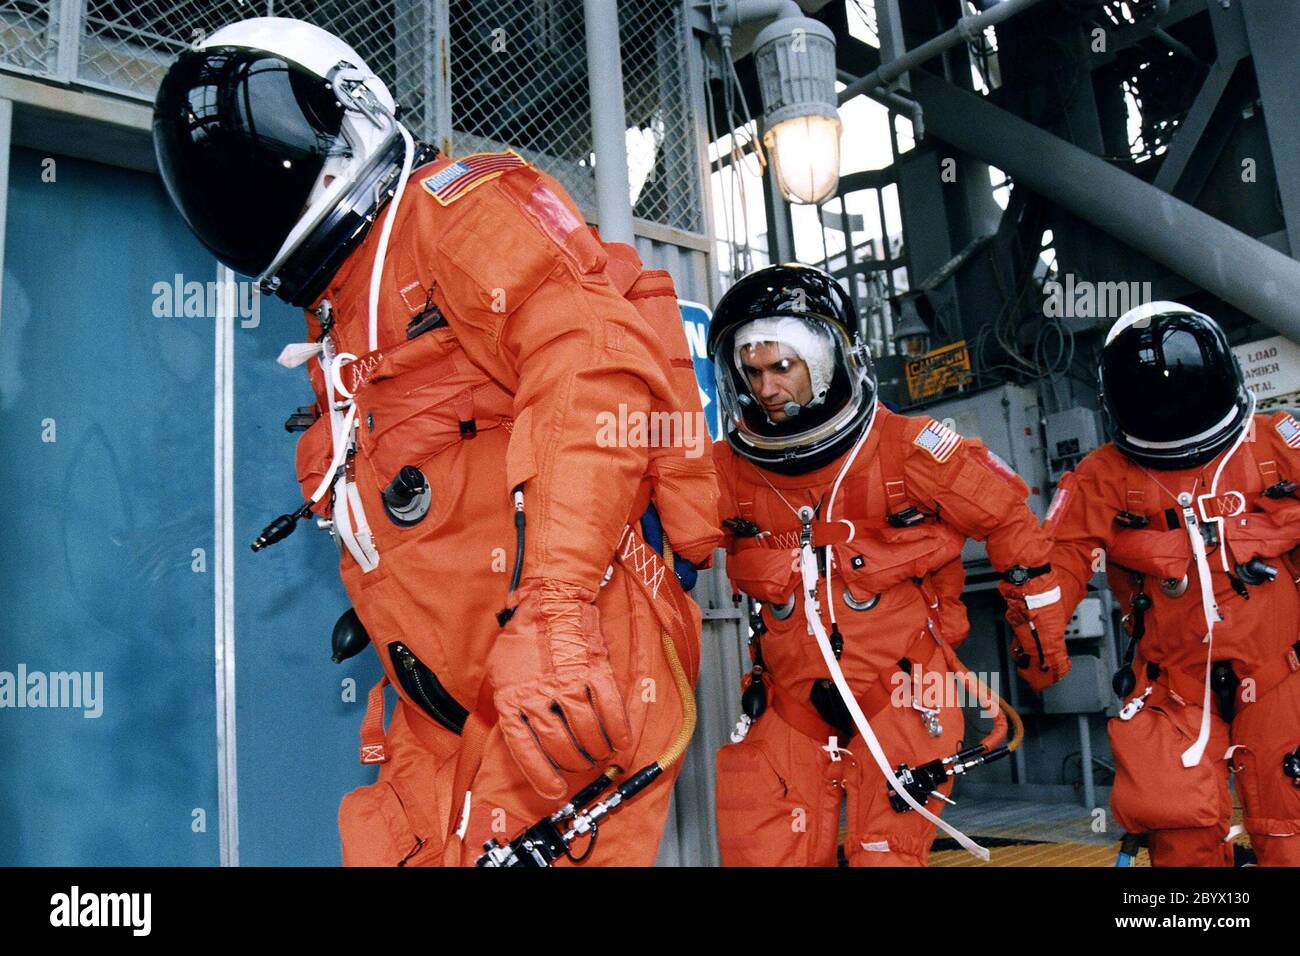 Three members of the STS-83 flight crew head toward the orbiter access arm on the 195-foot level Launch of Pad 39A that will take them to the crew hatch of the Space Shuttle Columbia during Terminal Countdown Demonstration Test (TCDT) exercises for that mission. Mission Specialist Donald A. Thomas is in the center of the group. Other crew members on the 16-day Microgravity Science Laboratory-1 (MSL-1) mission are: Mission Commander James D. Halsell, Jr.; Pilot Susan L. Still; Payload Commander Janice Voss; Mission Specialist Michael L.Gernhardt; and Payload Specialists Gregory T. Linteris and Stock Photo